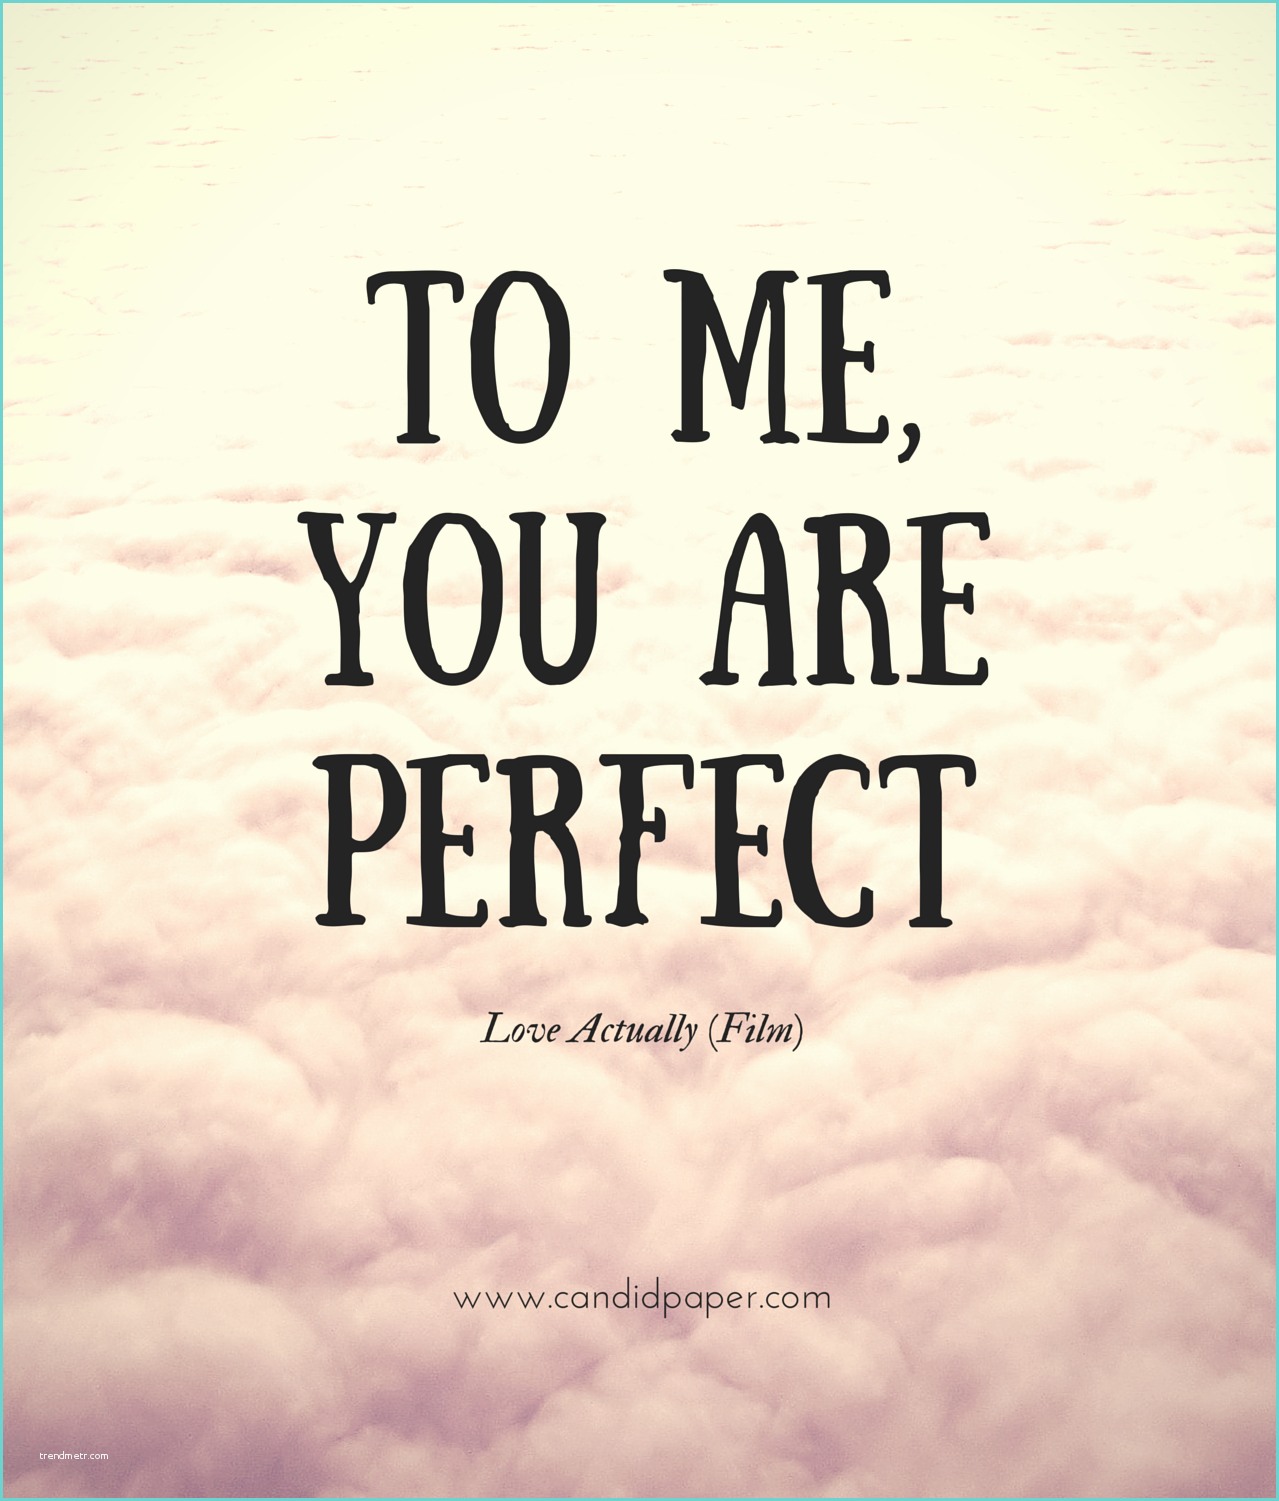 To Me You are Perfect Traduction to Me You are Perfect.